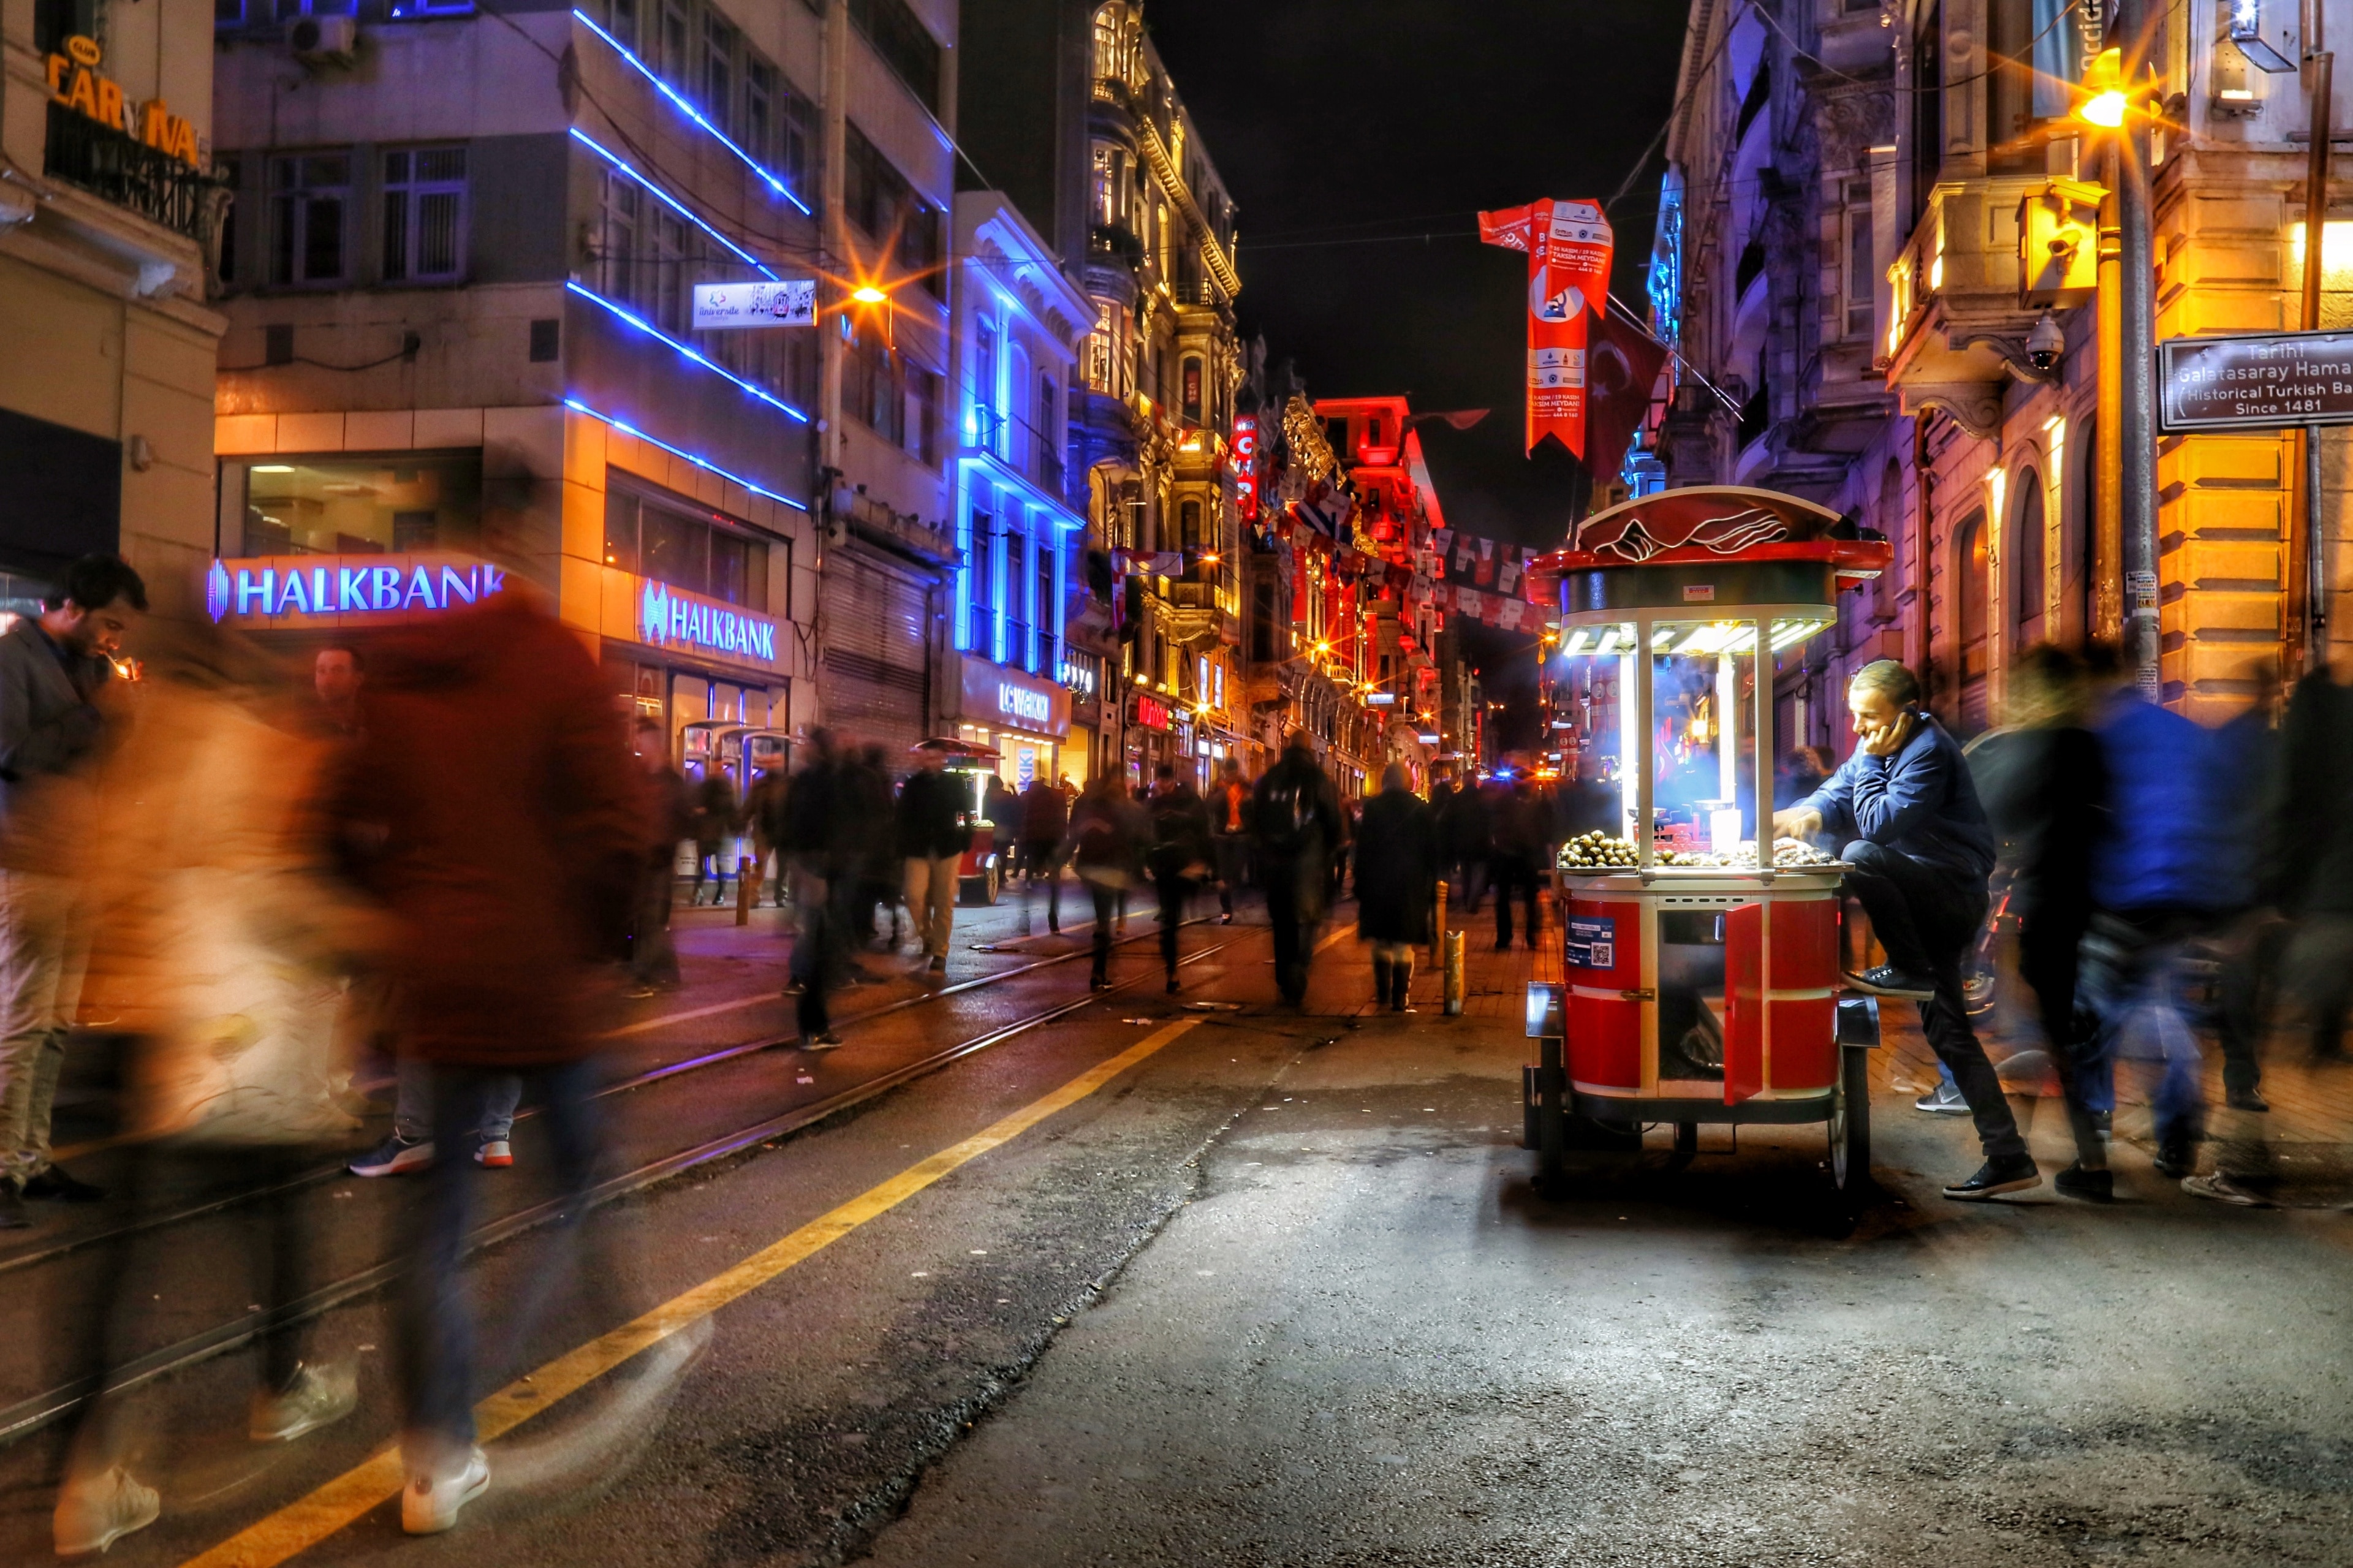 Istiklal avenue where an average of 3 million people walk in a day with a traditional street foods.
#LifeAtExpedia